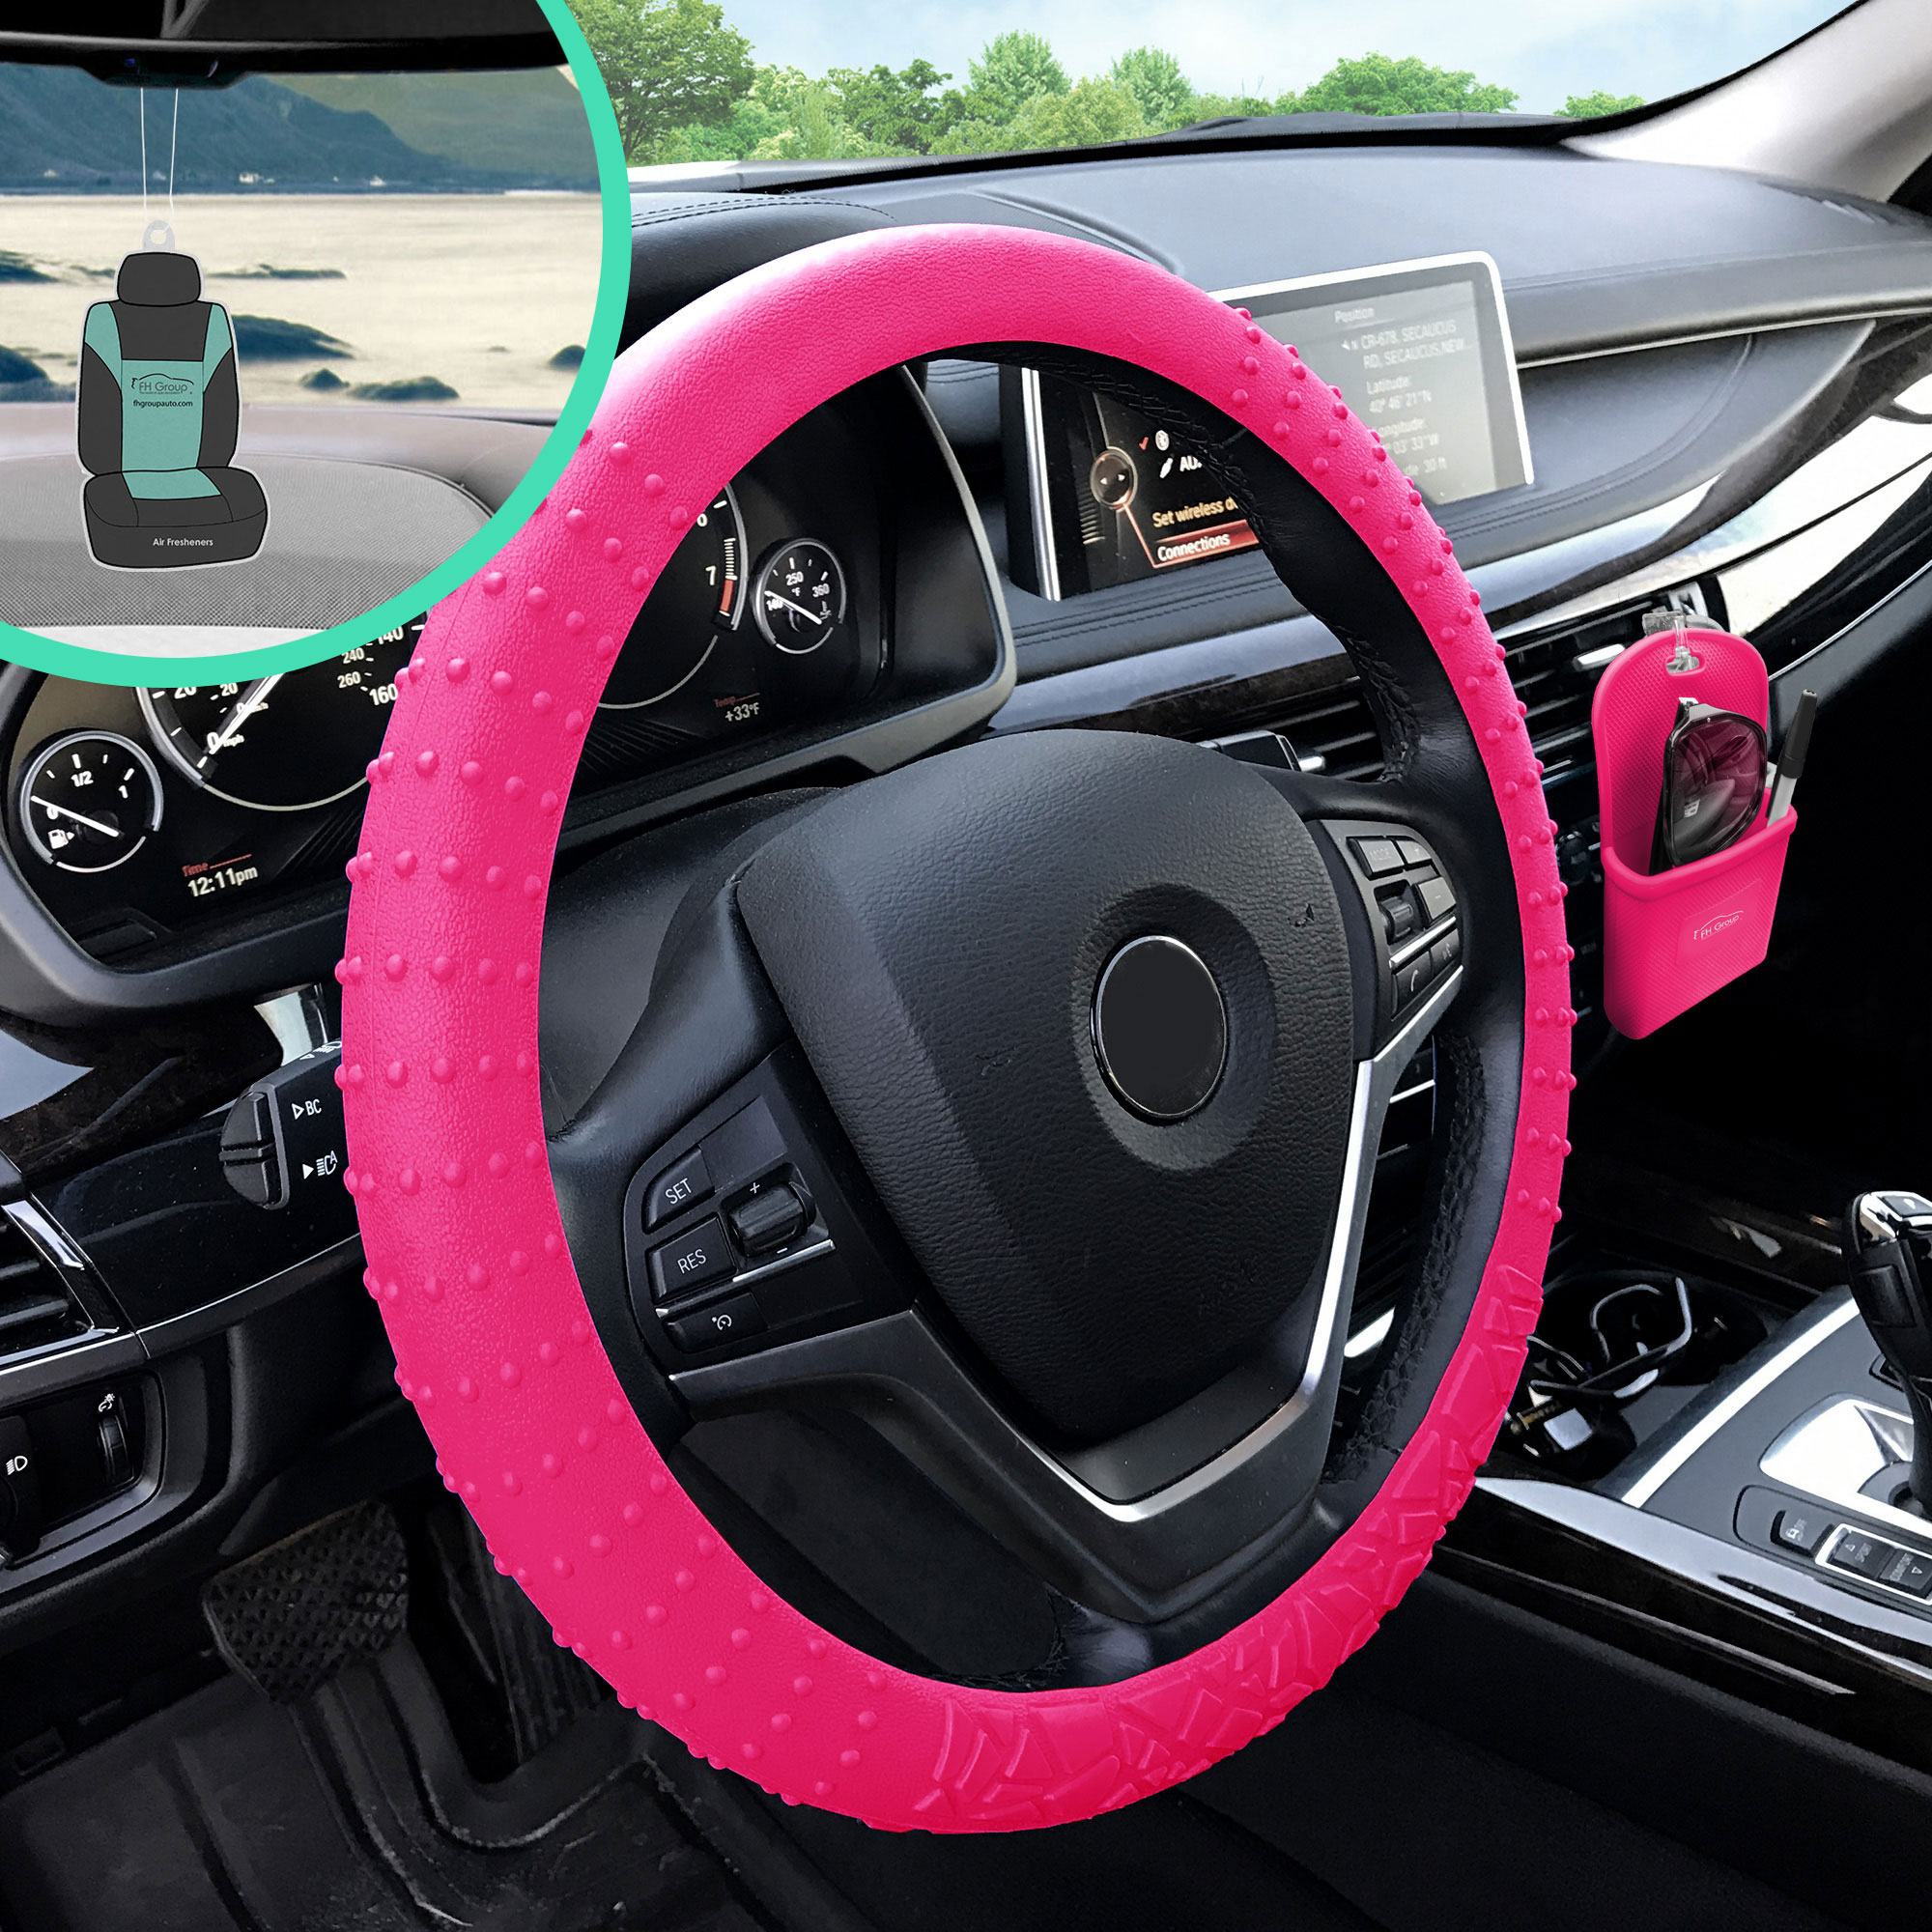 FH Group Silicone Steering Wheel Magenta Cover and Phone holder 1 lb. with Air Freshener - image 1 of 4